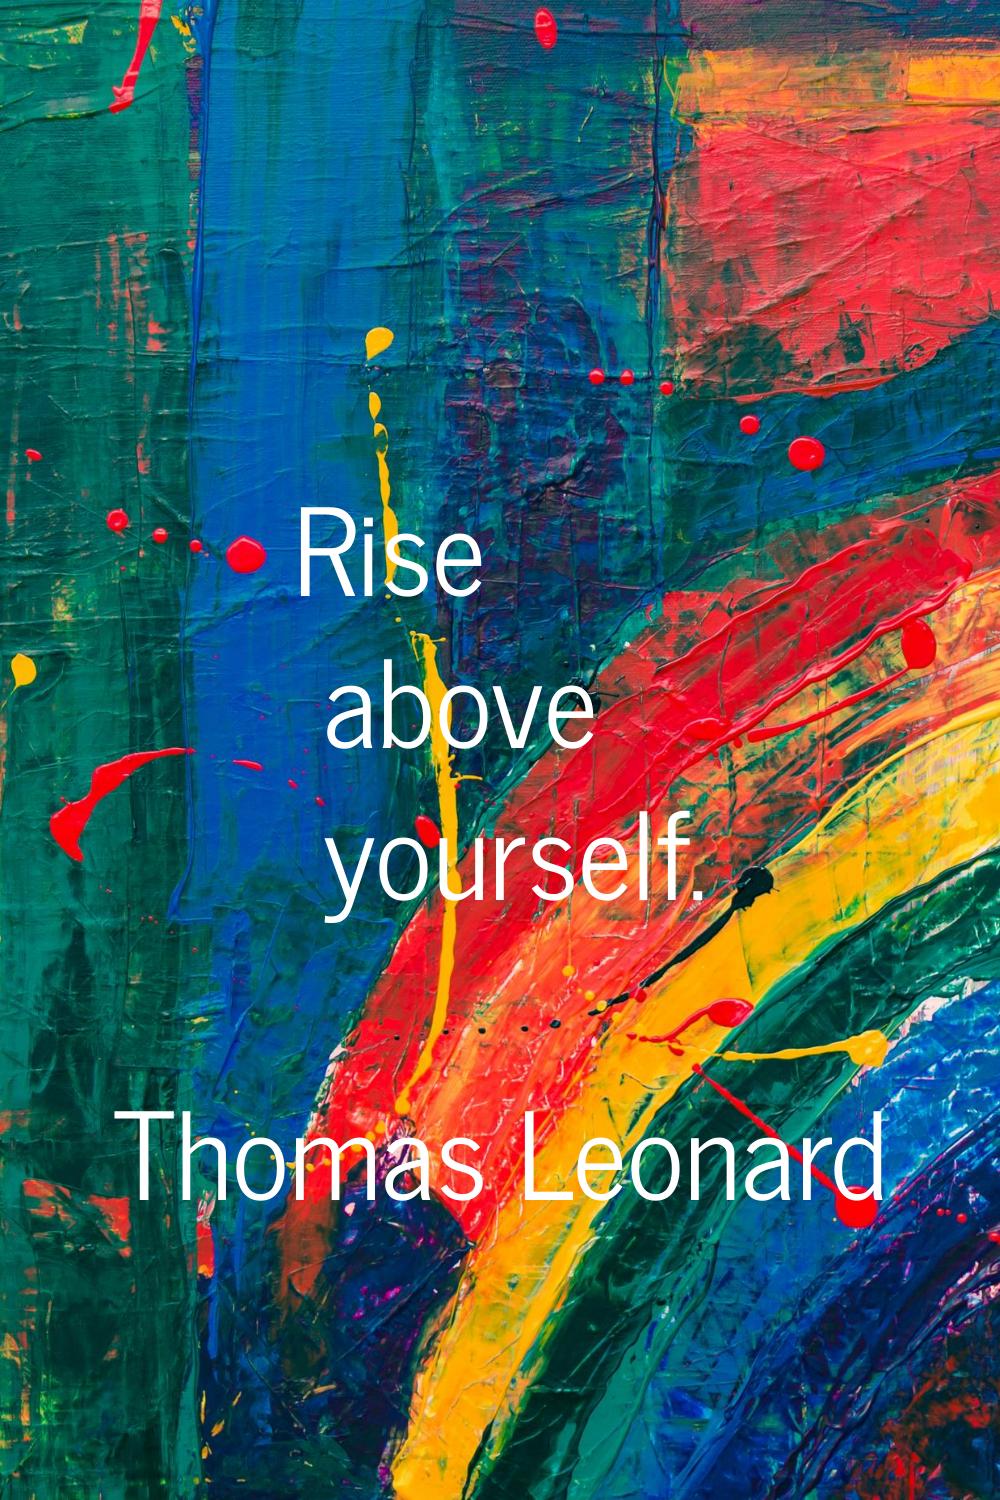 Rise above yourself.